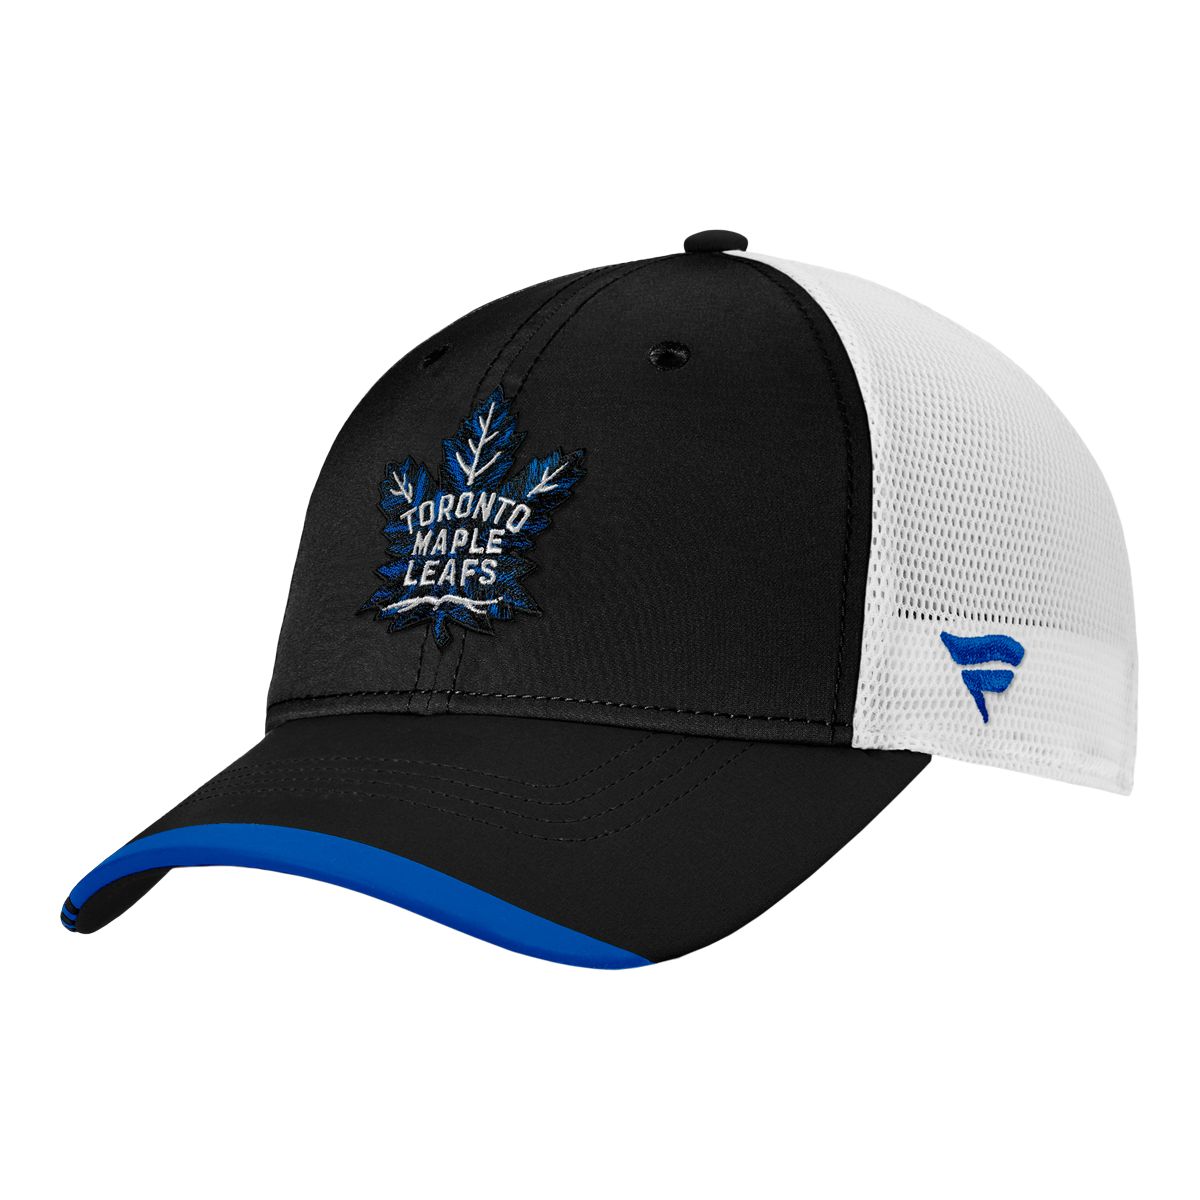  Men's Compatible with Toronto Maple Leafs Authentic X